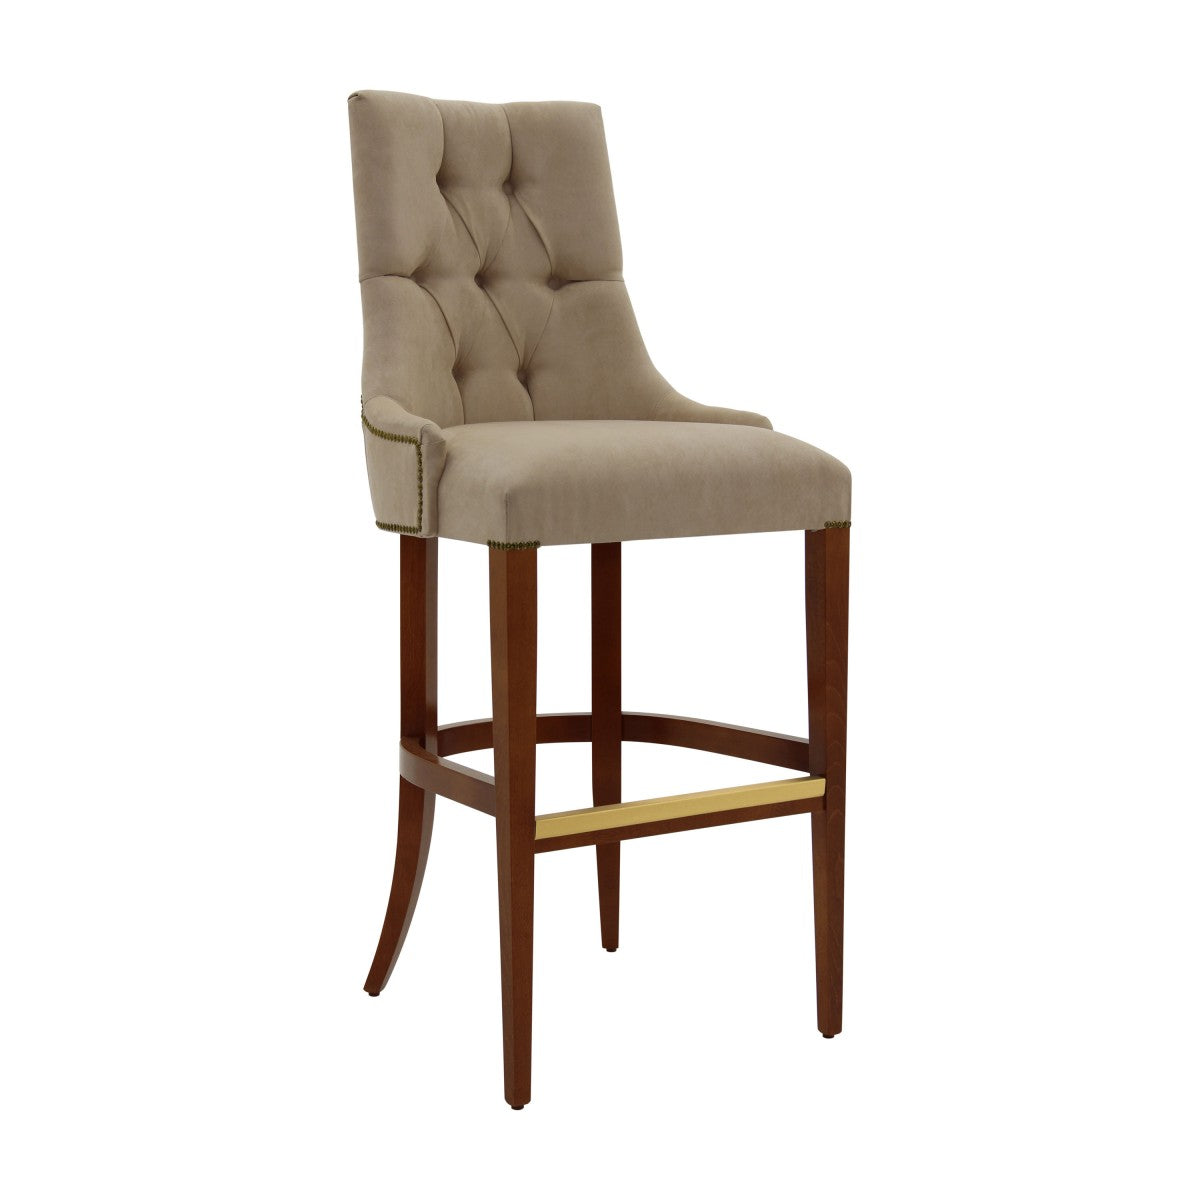 Olympia Bespoke Upholstered Contemporary Kitchen Barstool MS410B Custom Made To Order